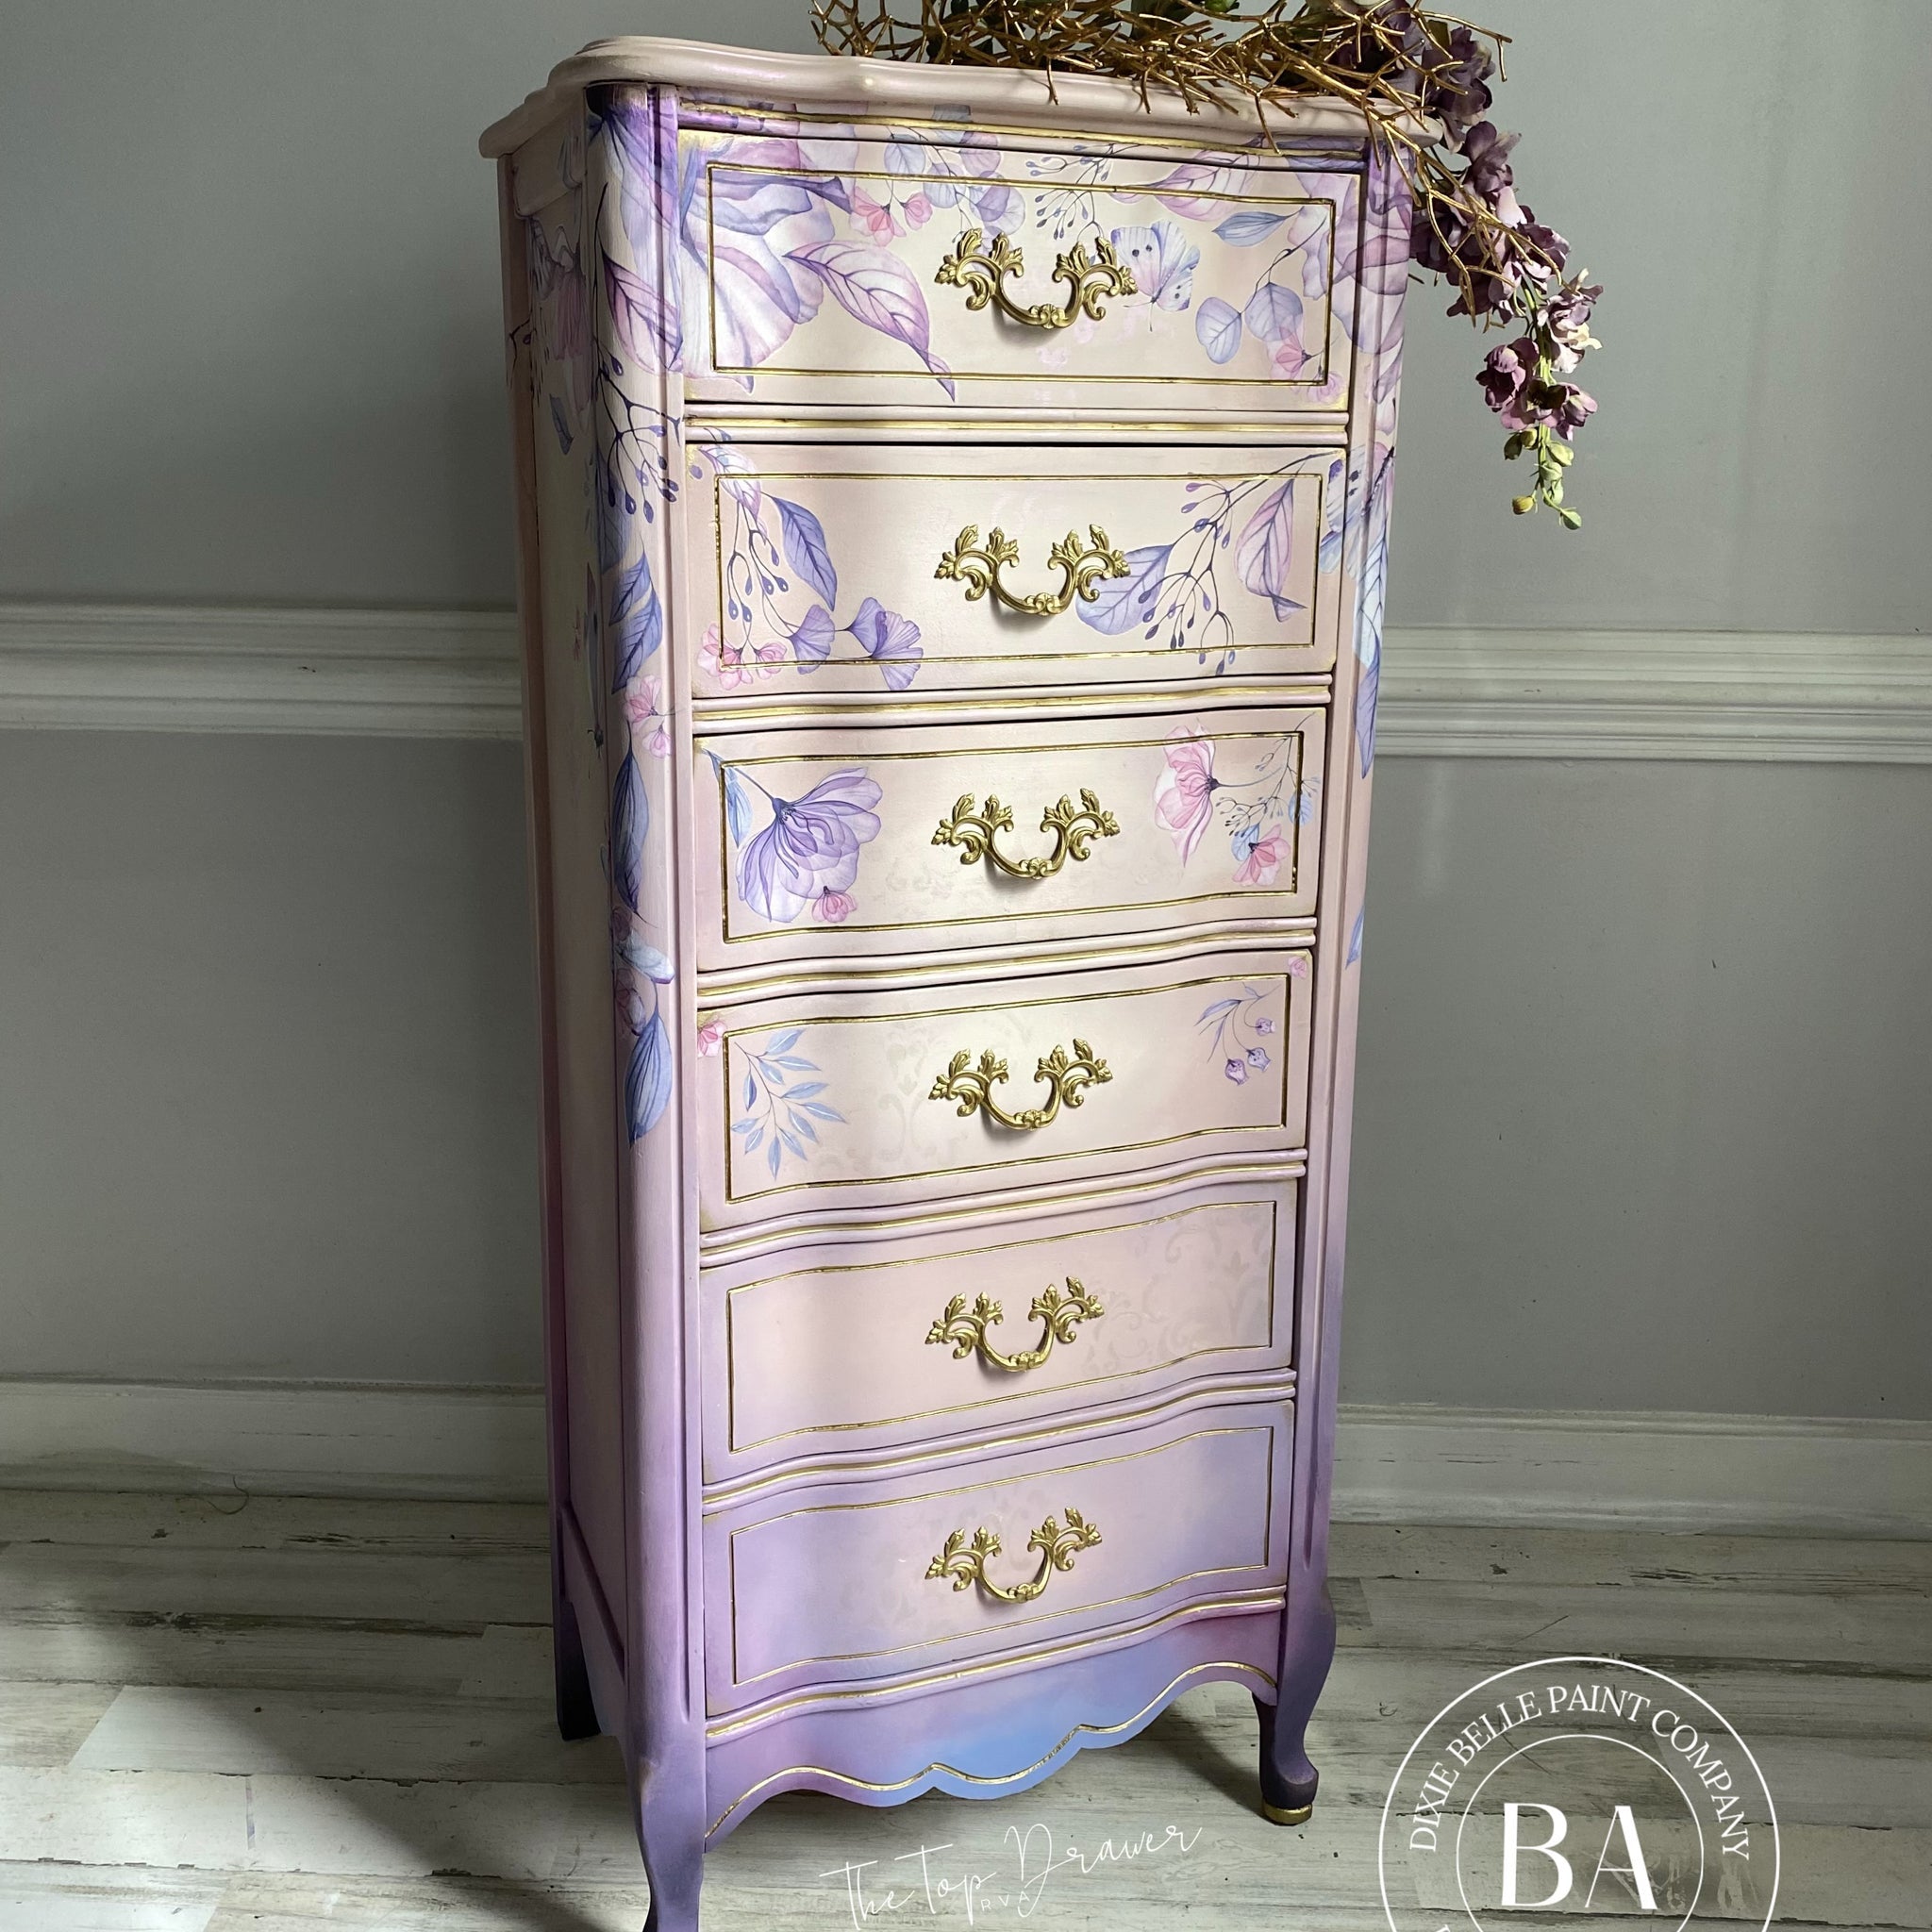 A tall French Provencial chest dresser refurbished by The Top Drawer, a Dixie Belle Paint Company Brand Ambassador, is painted light beige and light purple and features the Translucent Garden Transfer on it.